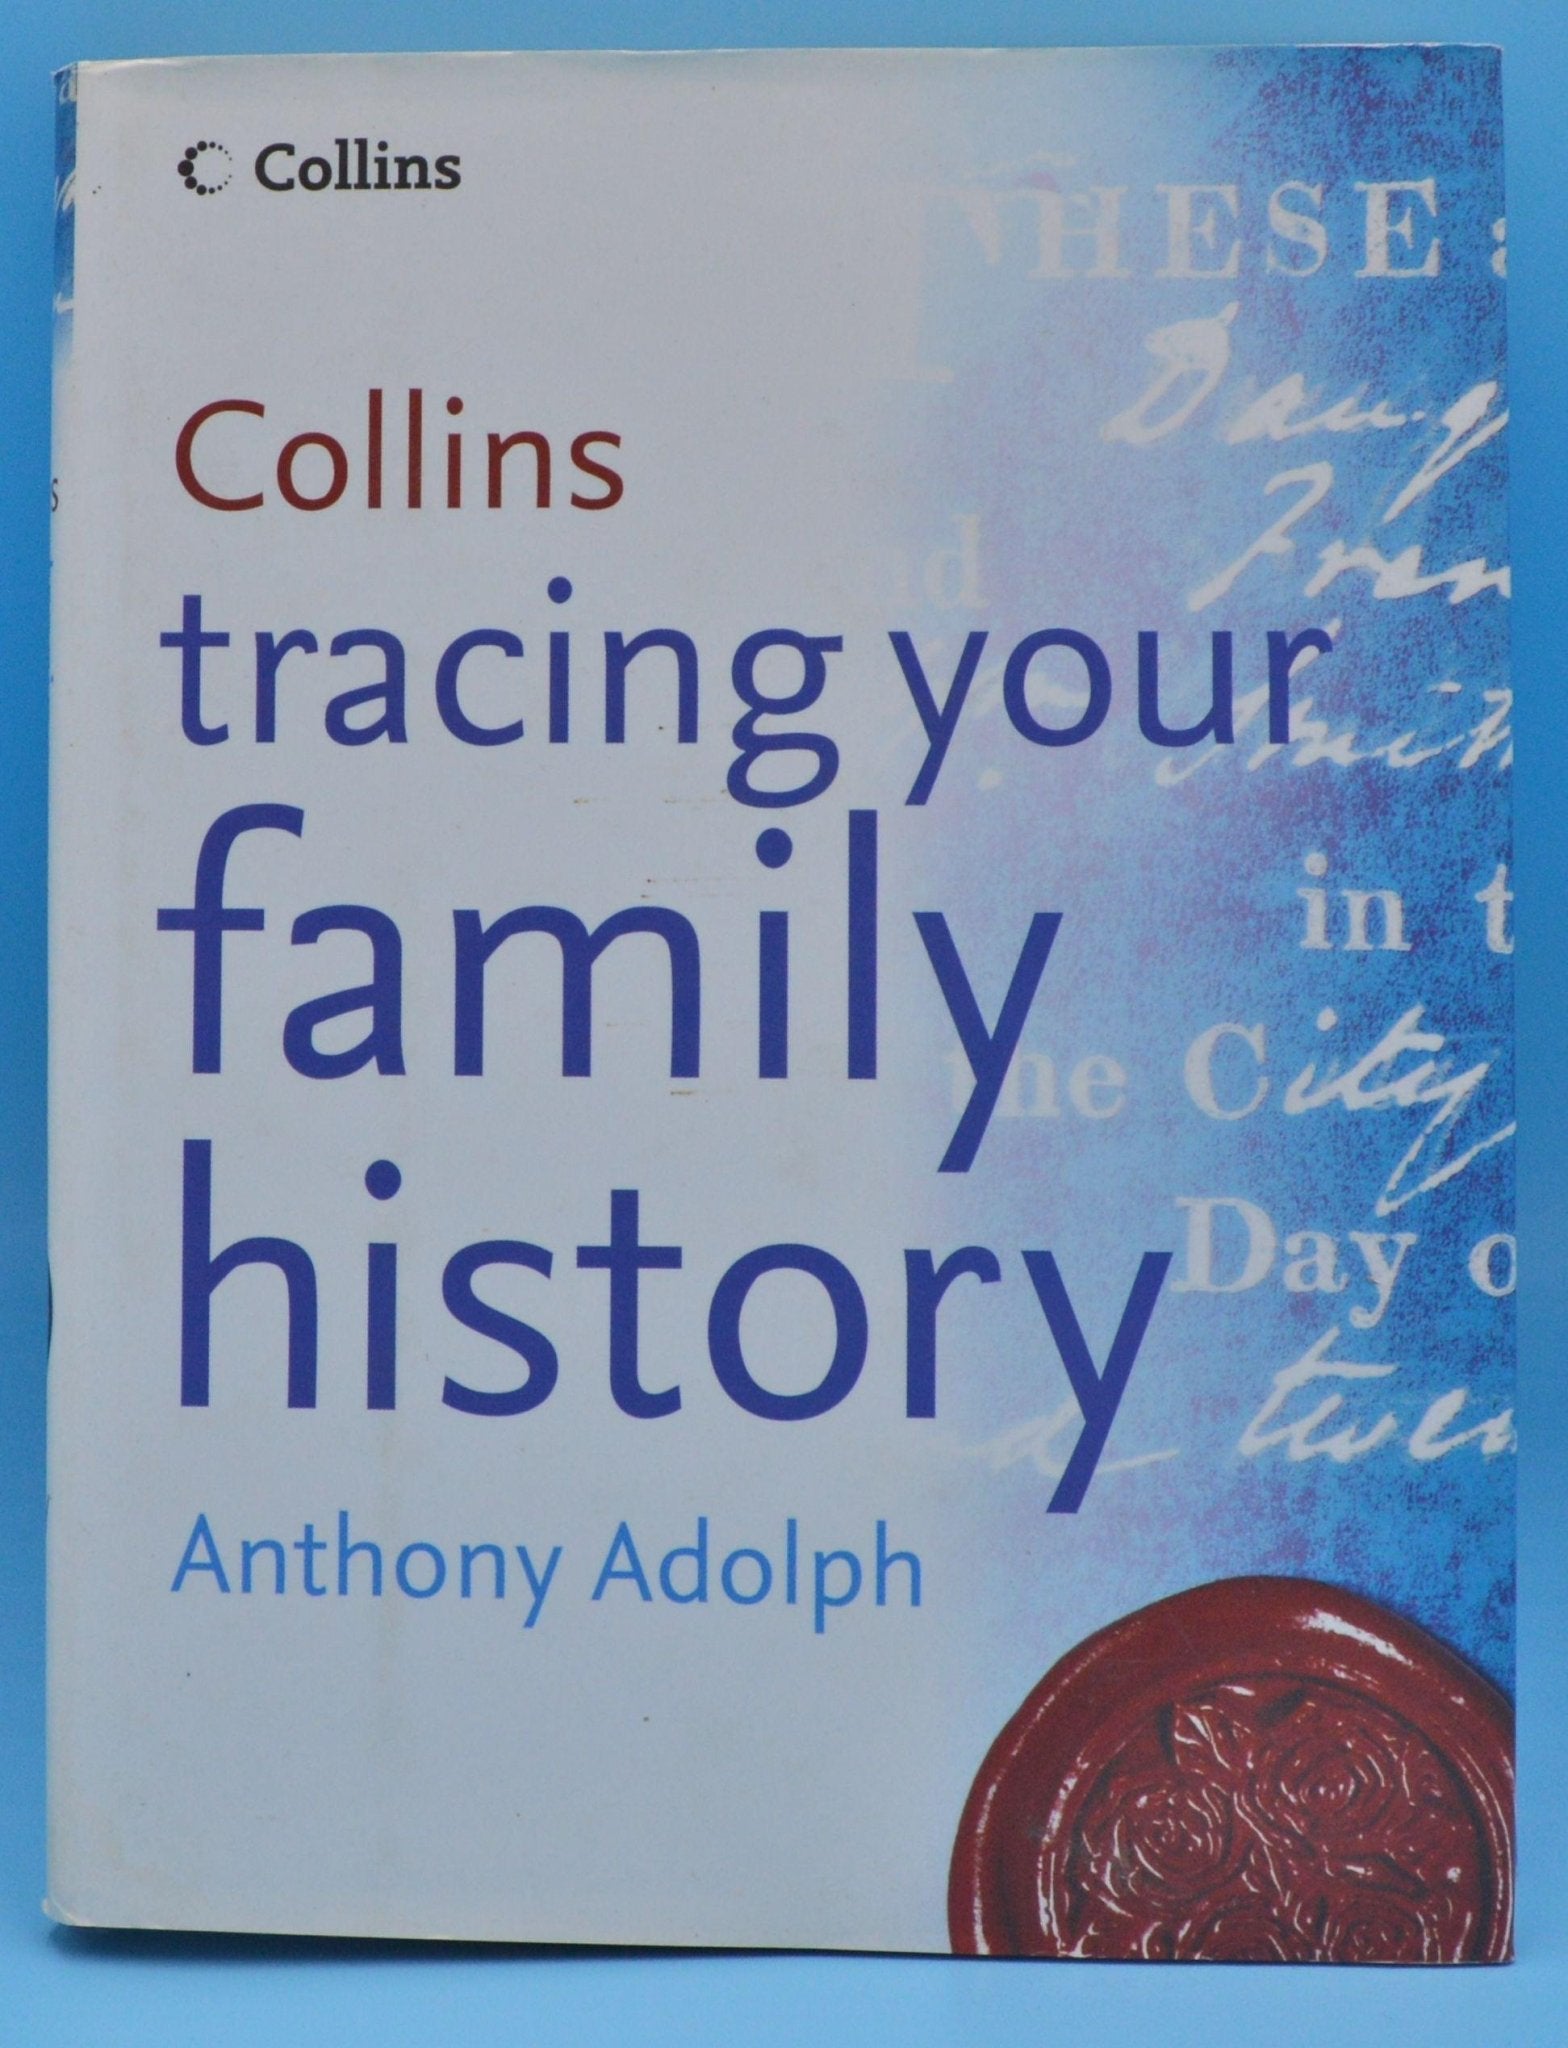 SECONDHAND BOOK TRACING YOUR FAMILY TREE by ANTHONY ADOLPH - TMD167207